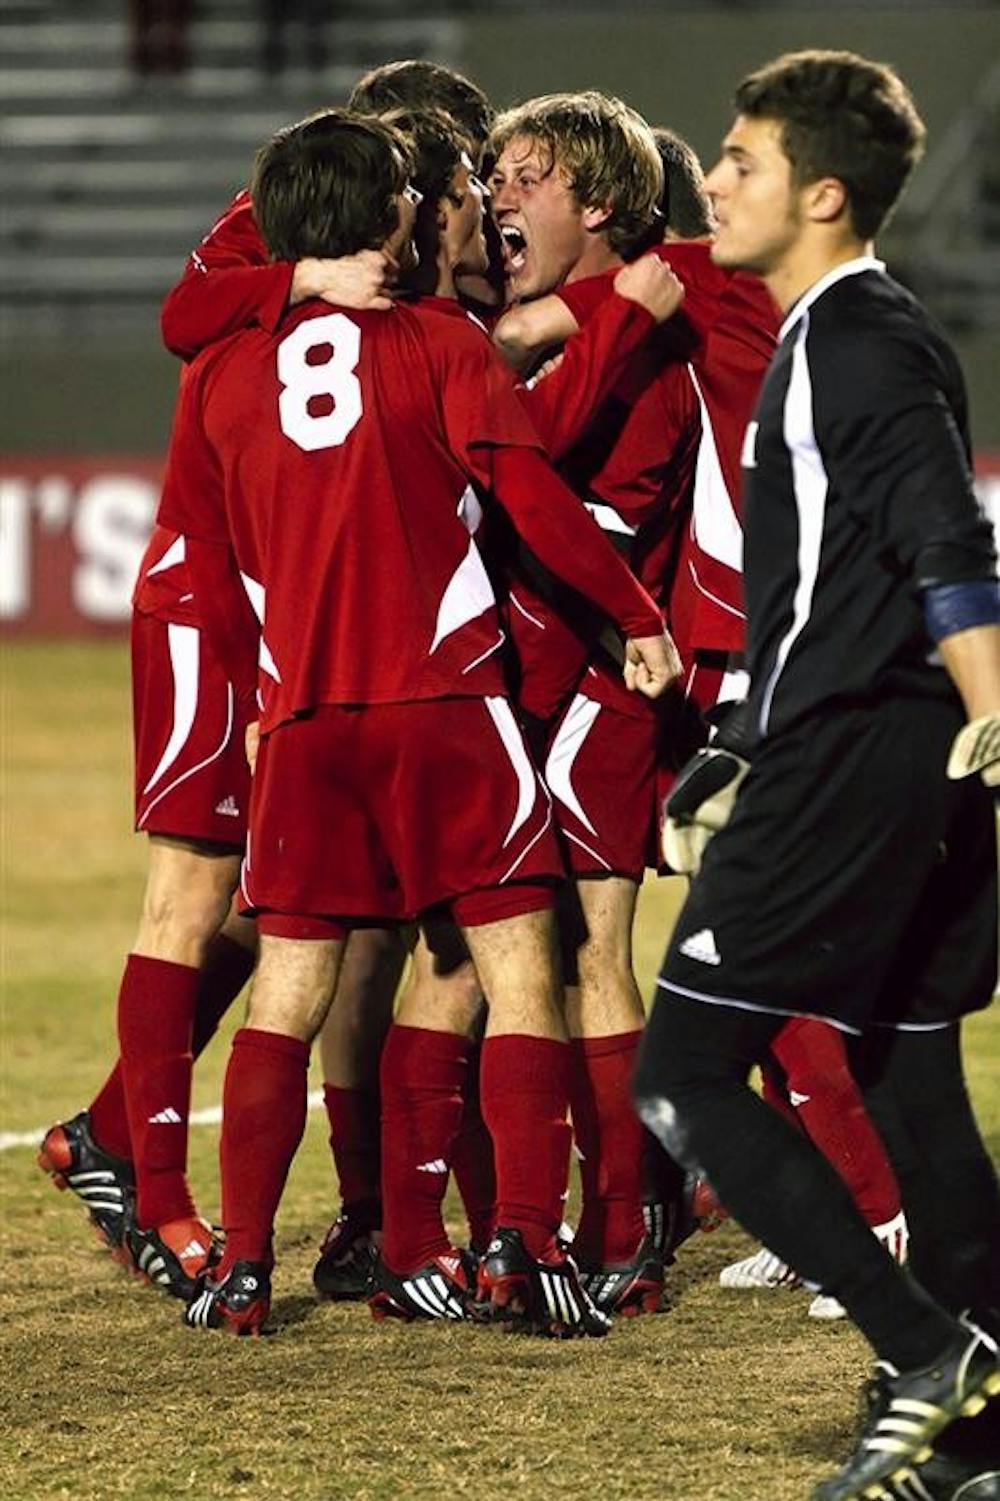 Senior midfielder Brad Ring (center) celebrates with teammates following his first goal of the season in the 77th minute of the Hoosiers 3-0 NCAA Tournament win Saturday against Michigan at Bill Armstrong Stadium.